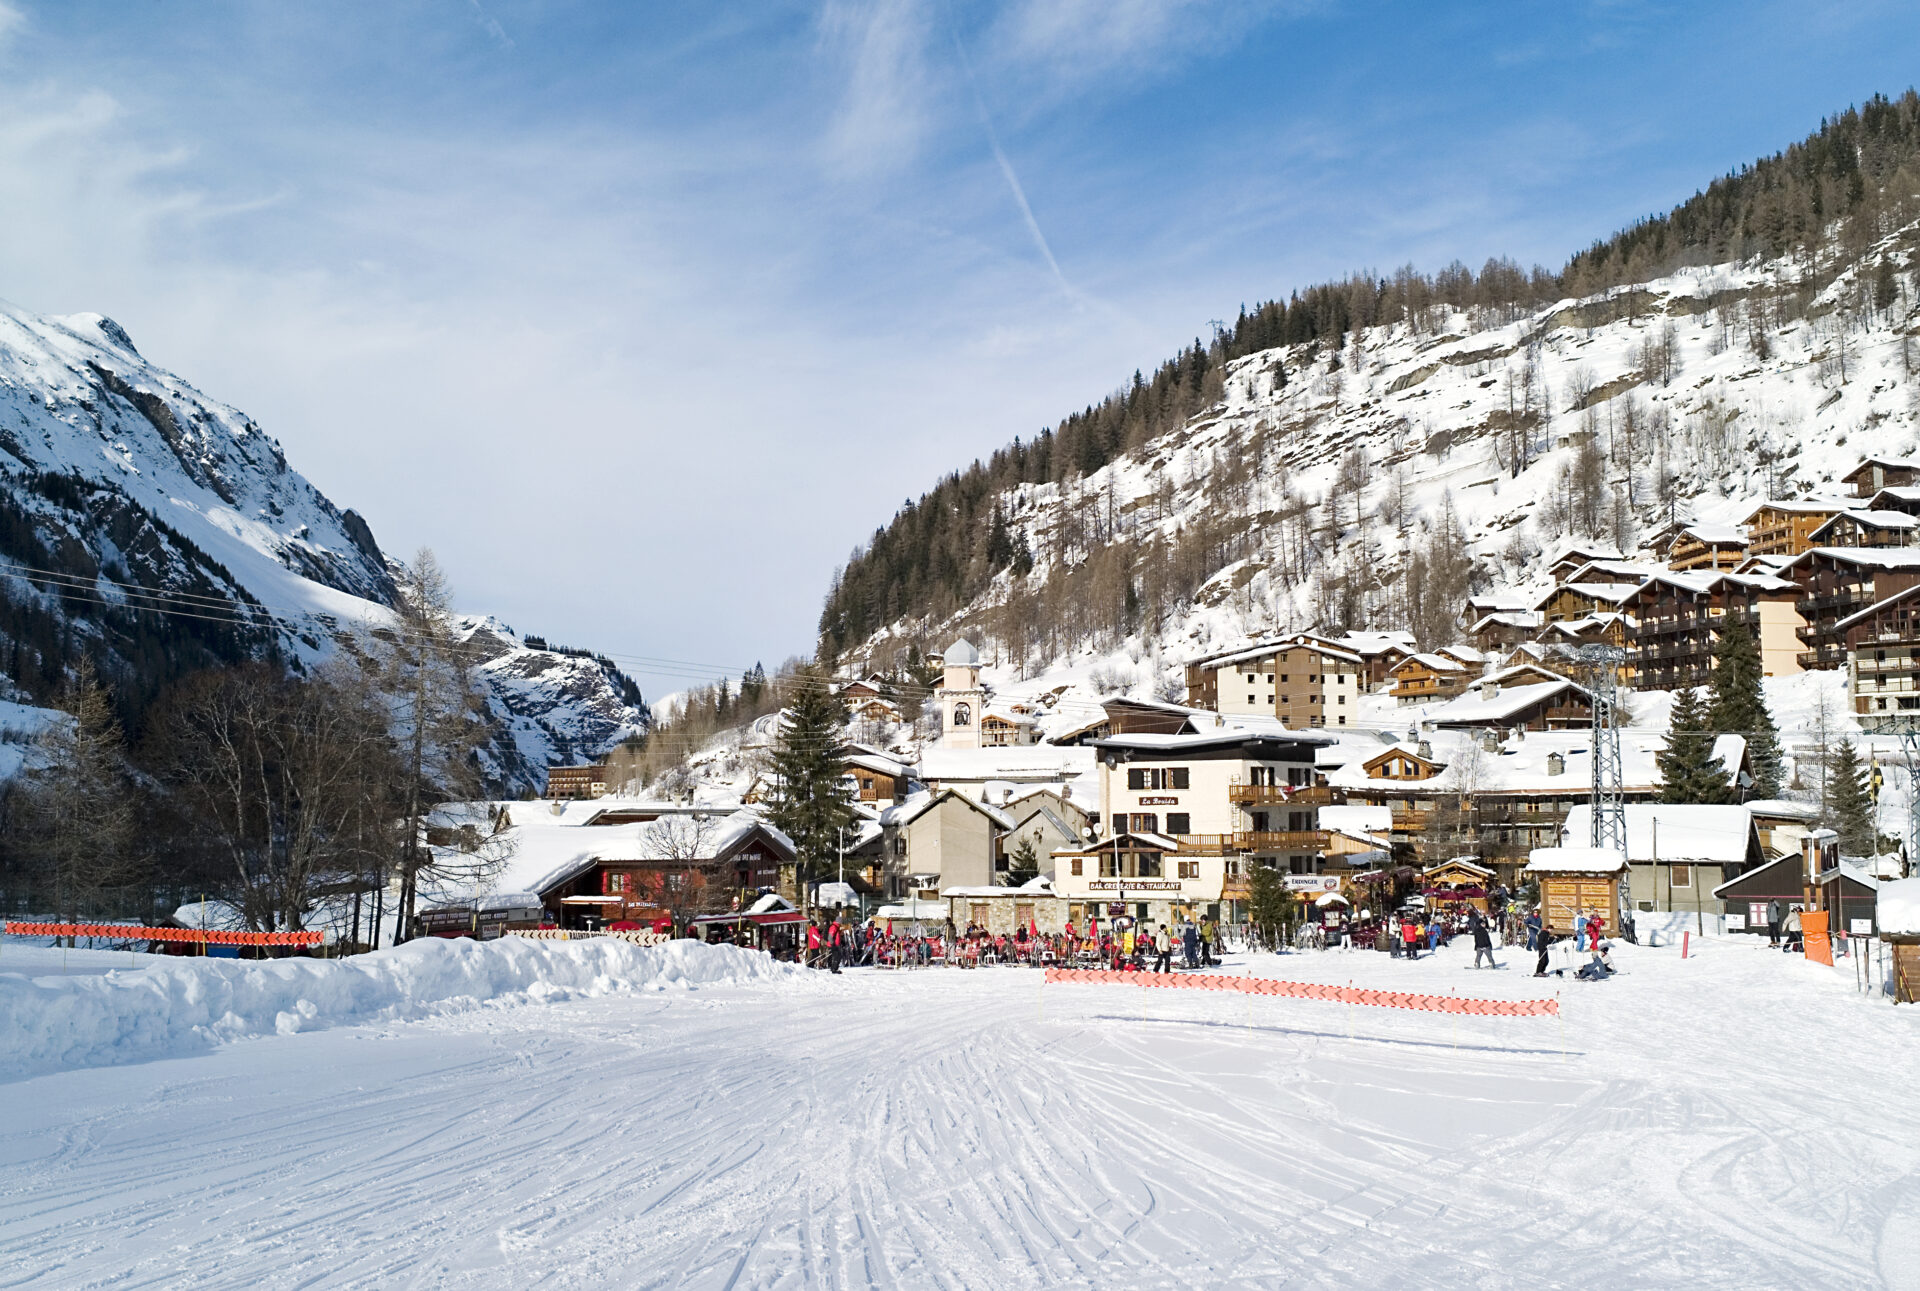 An image of the Tignes Les Brevieres resort